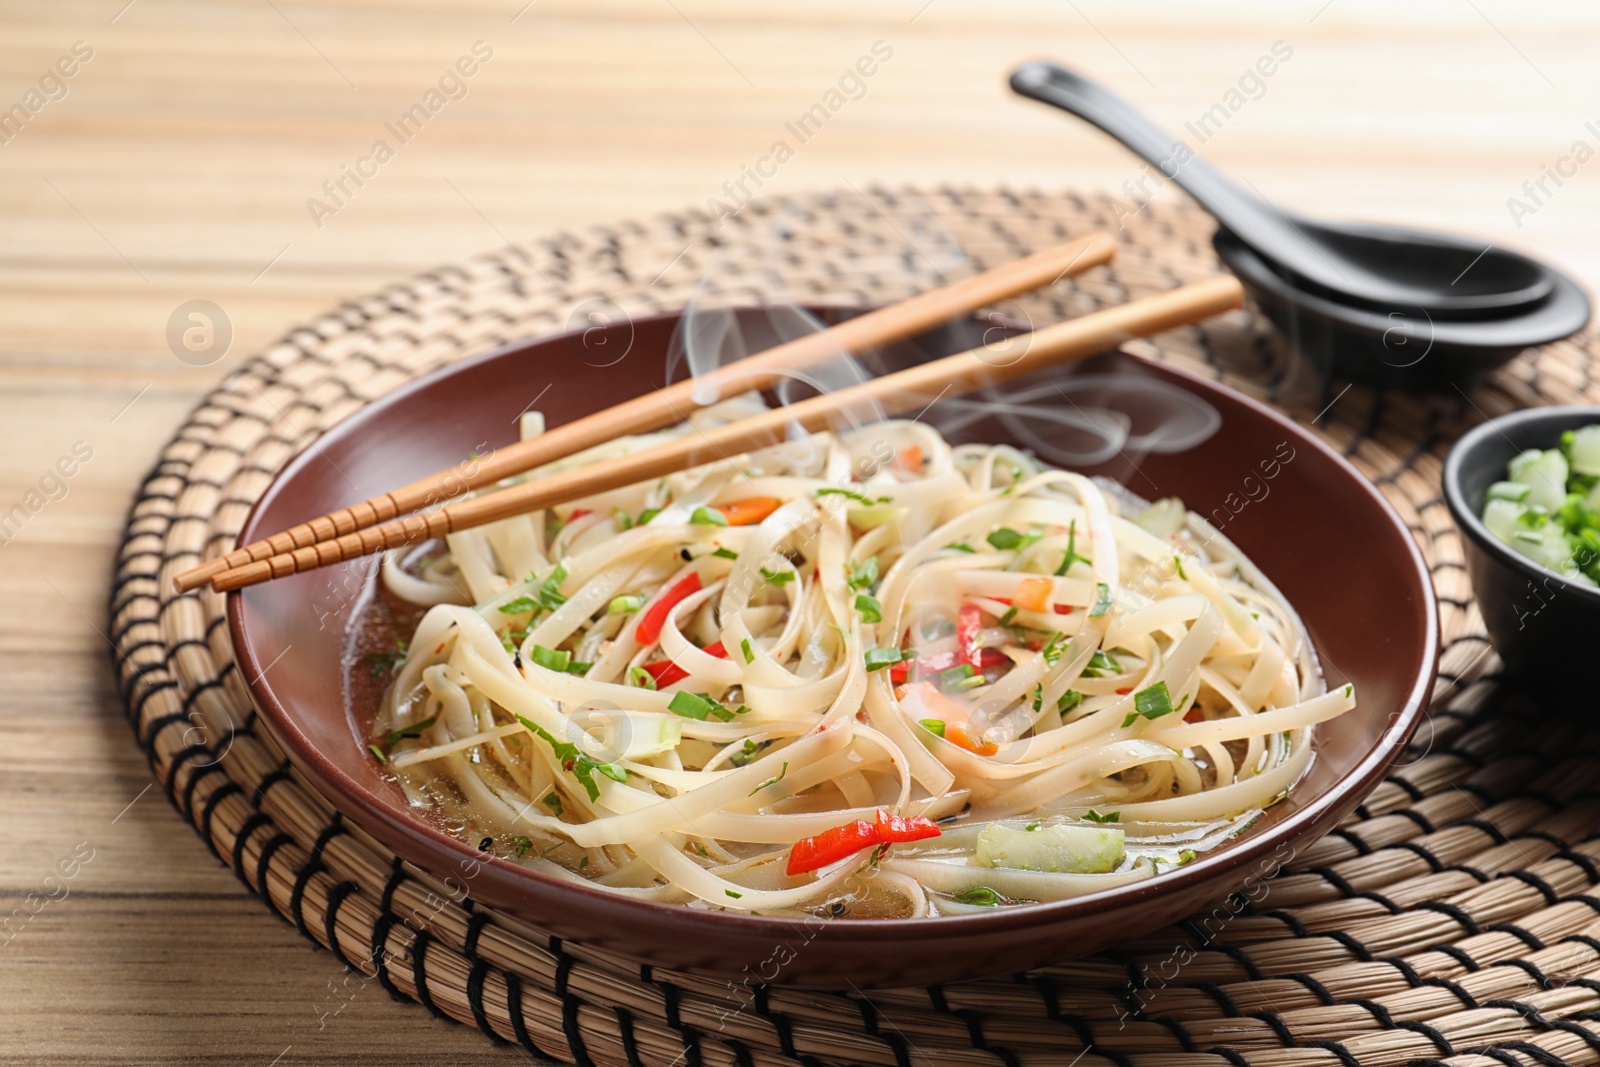 Photo of Plate of hot noodles with broth, vegetables and chopsticks on table